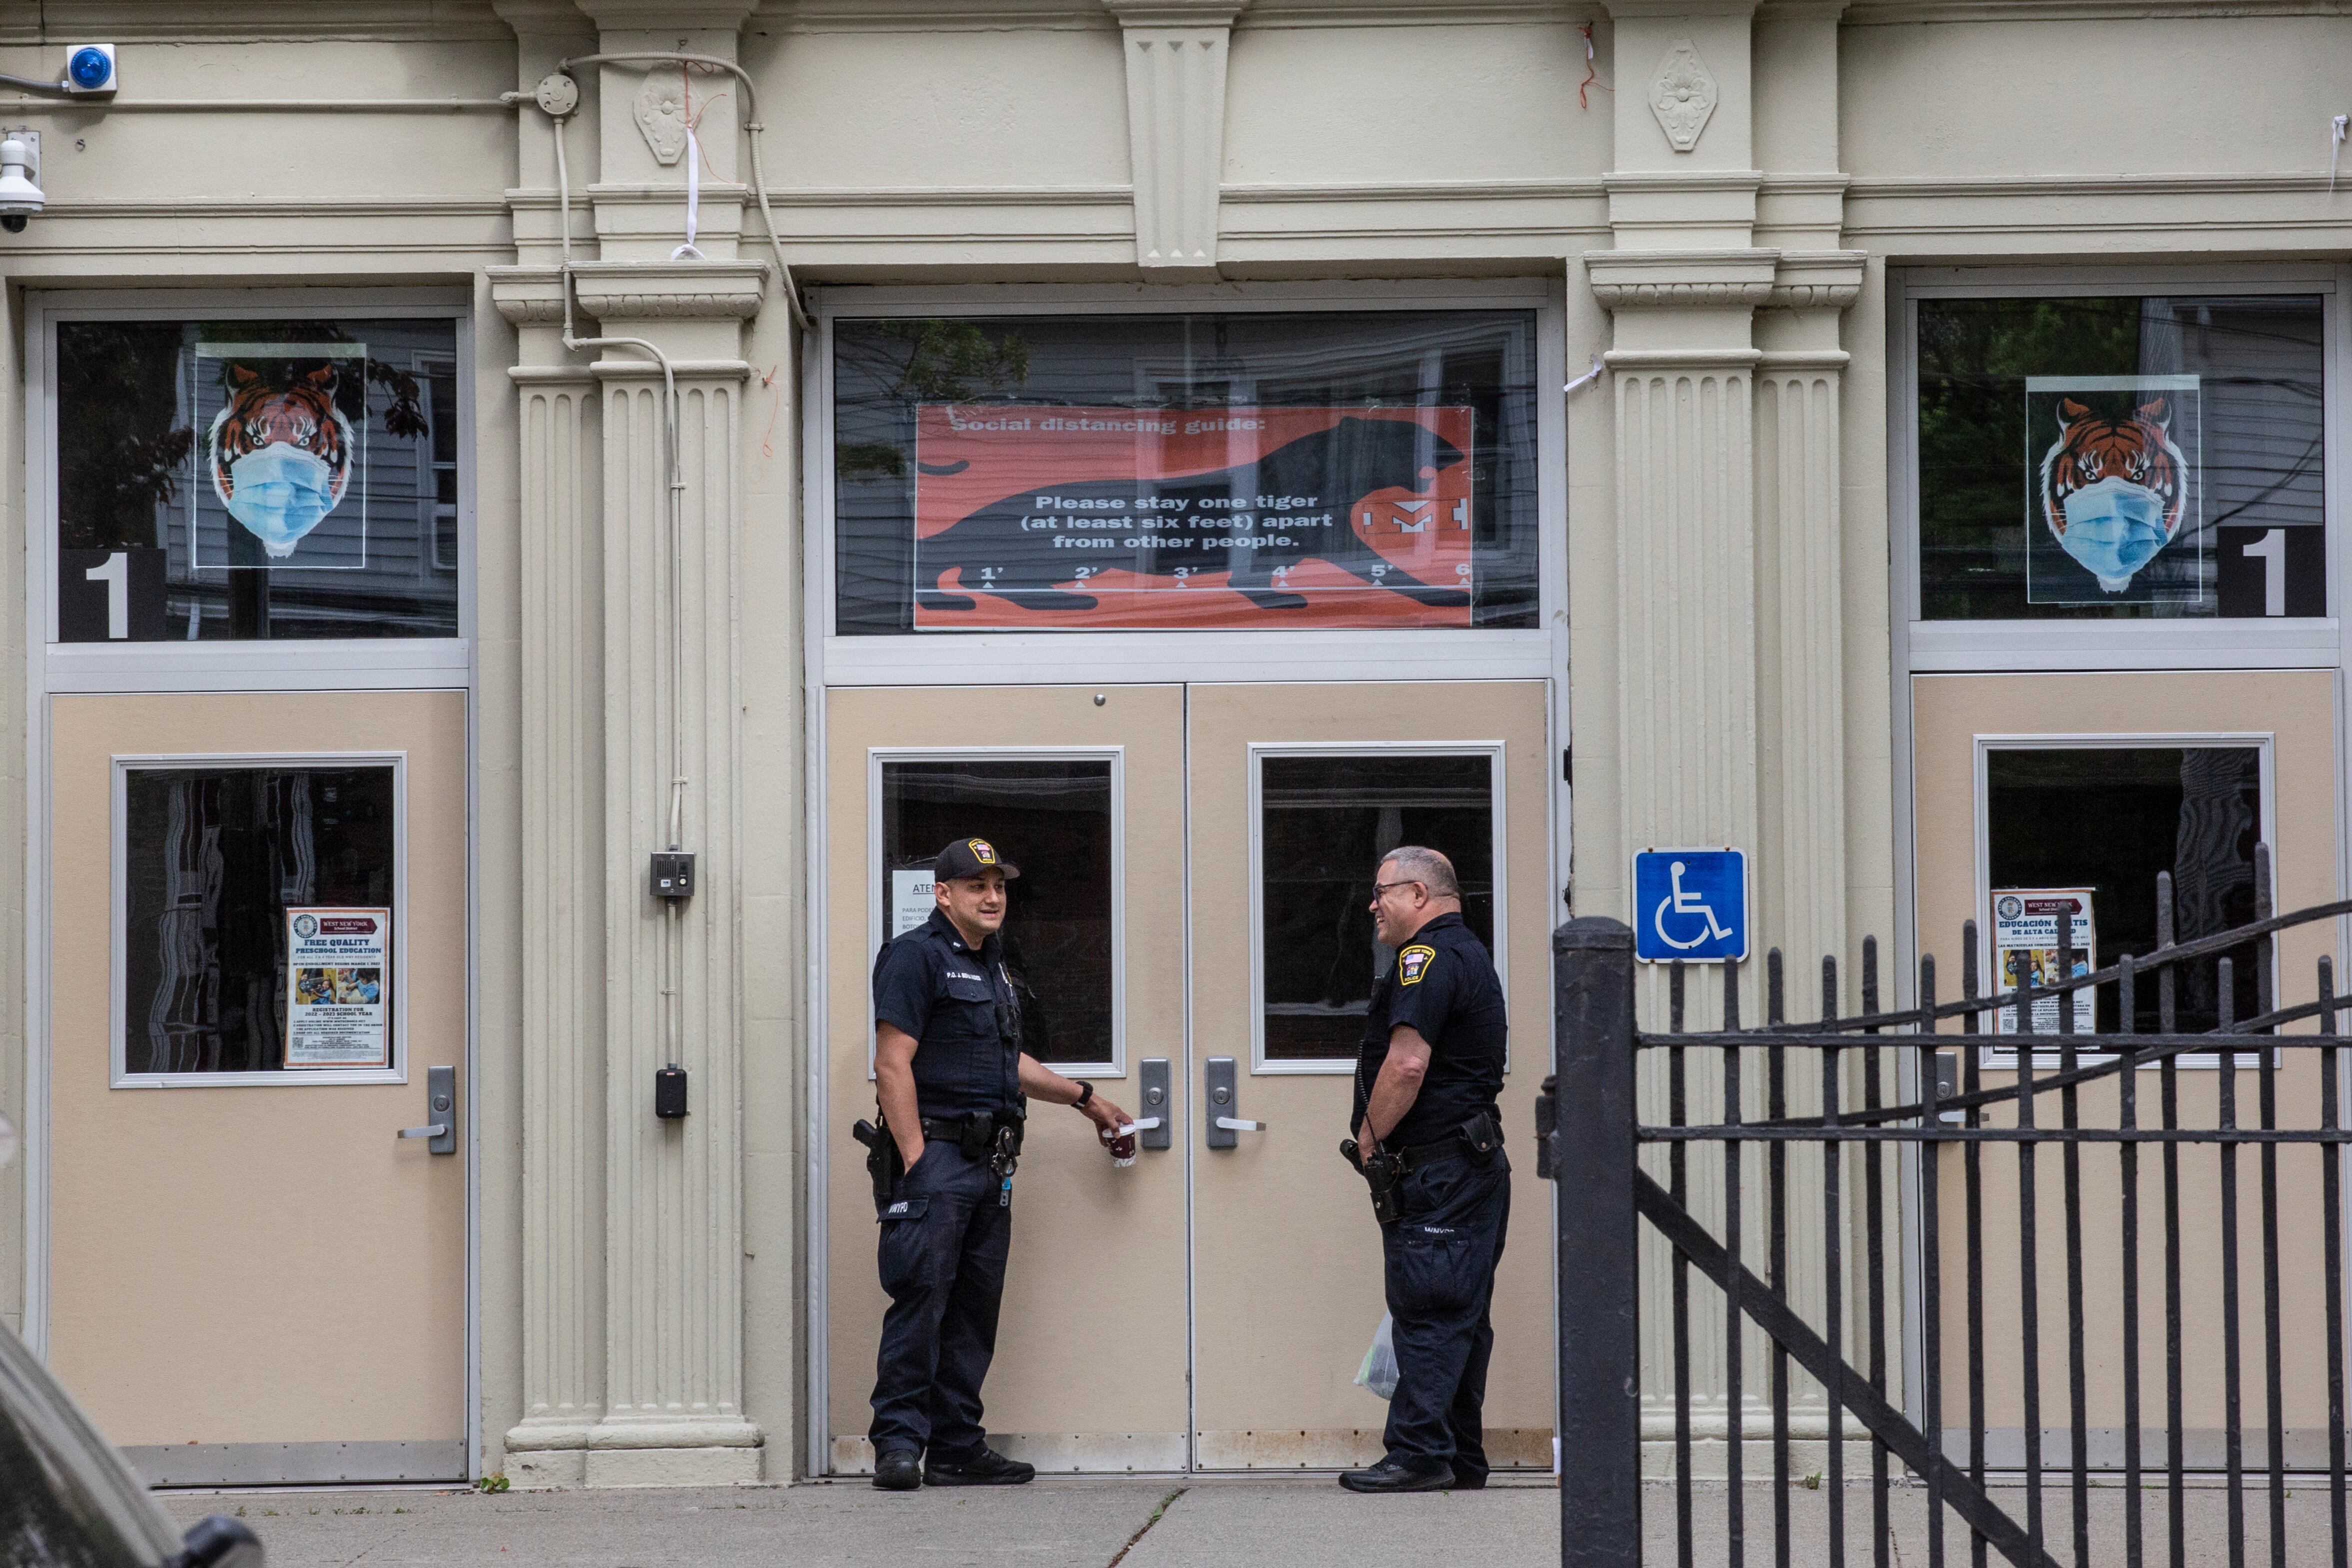 Two police officers stand in front of the entrance of a high school, the doors seen behind a metal fence.